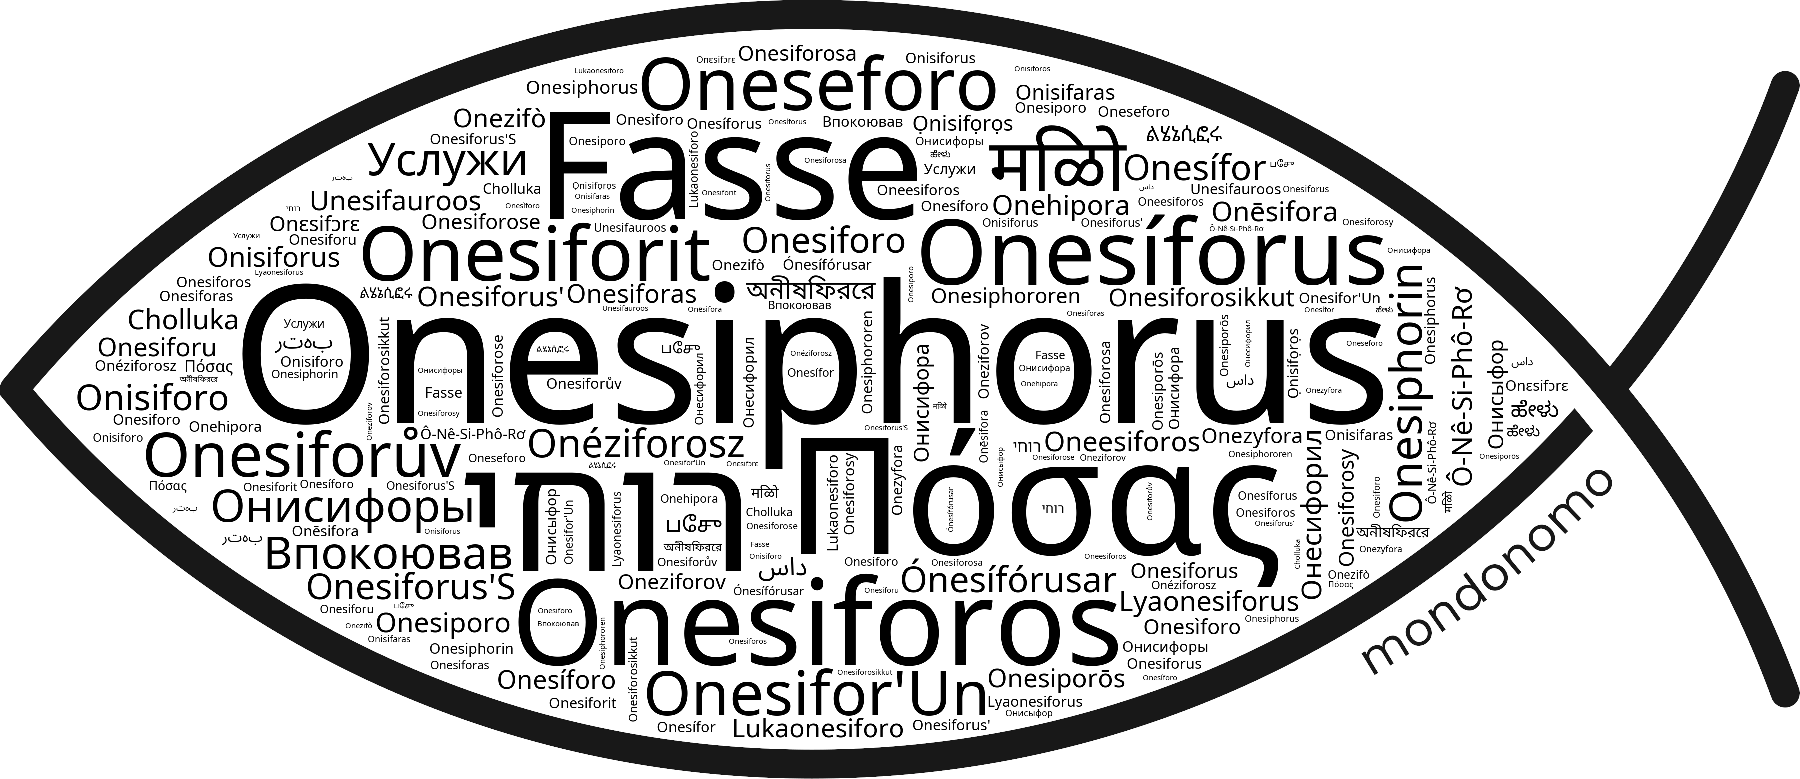 Name Onesiphorus in the world's Bibles